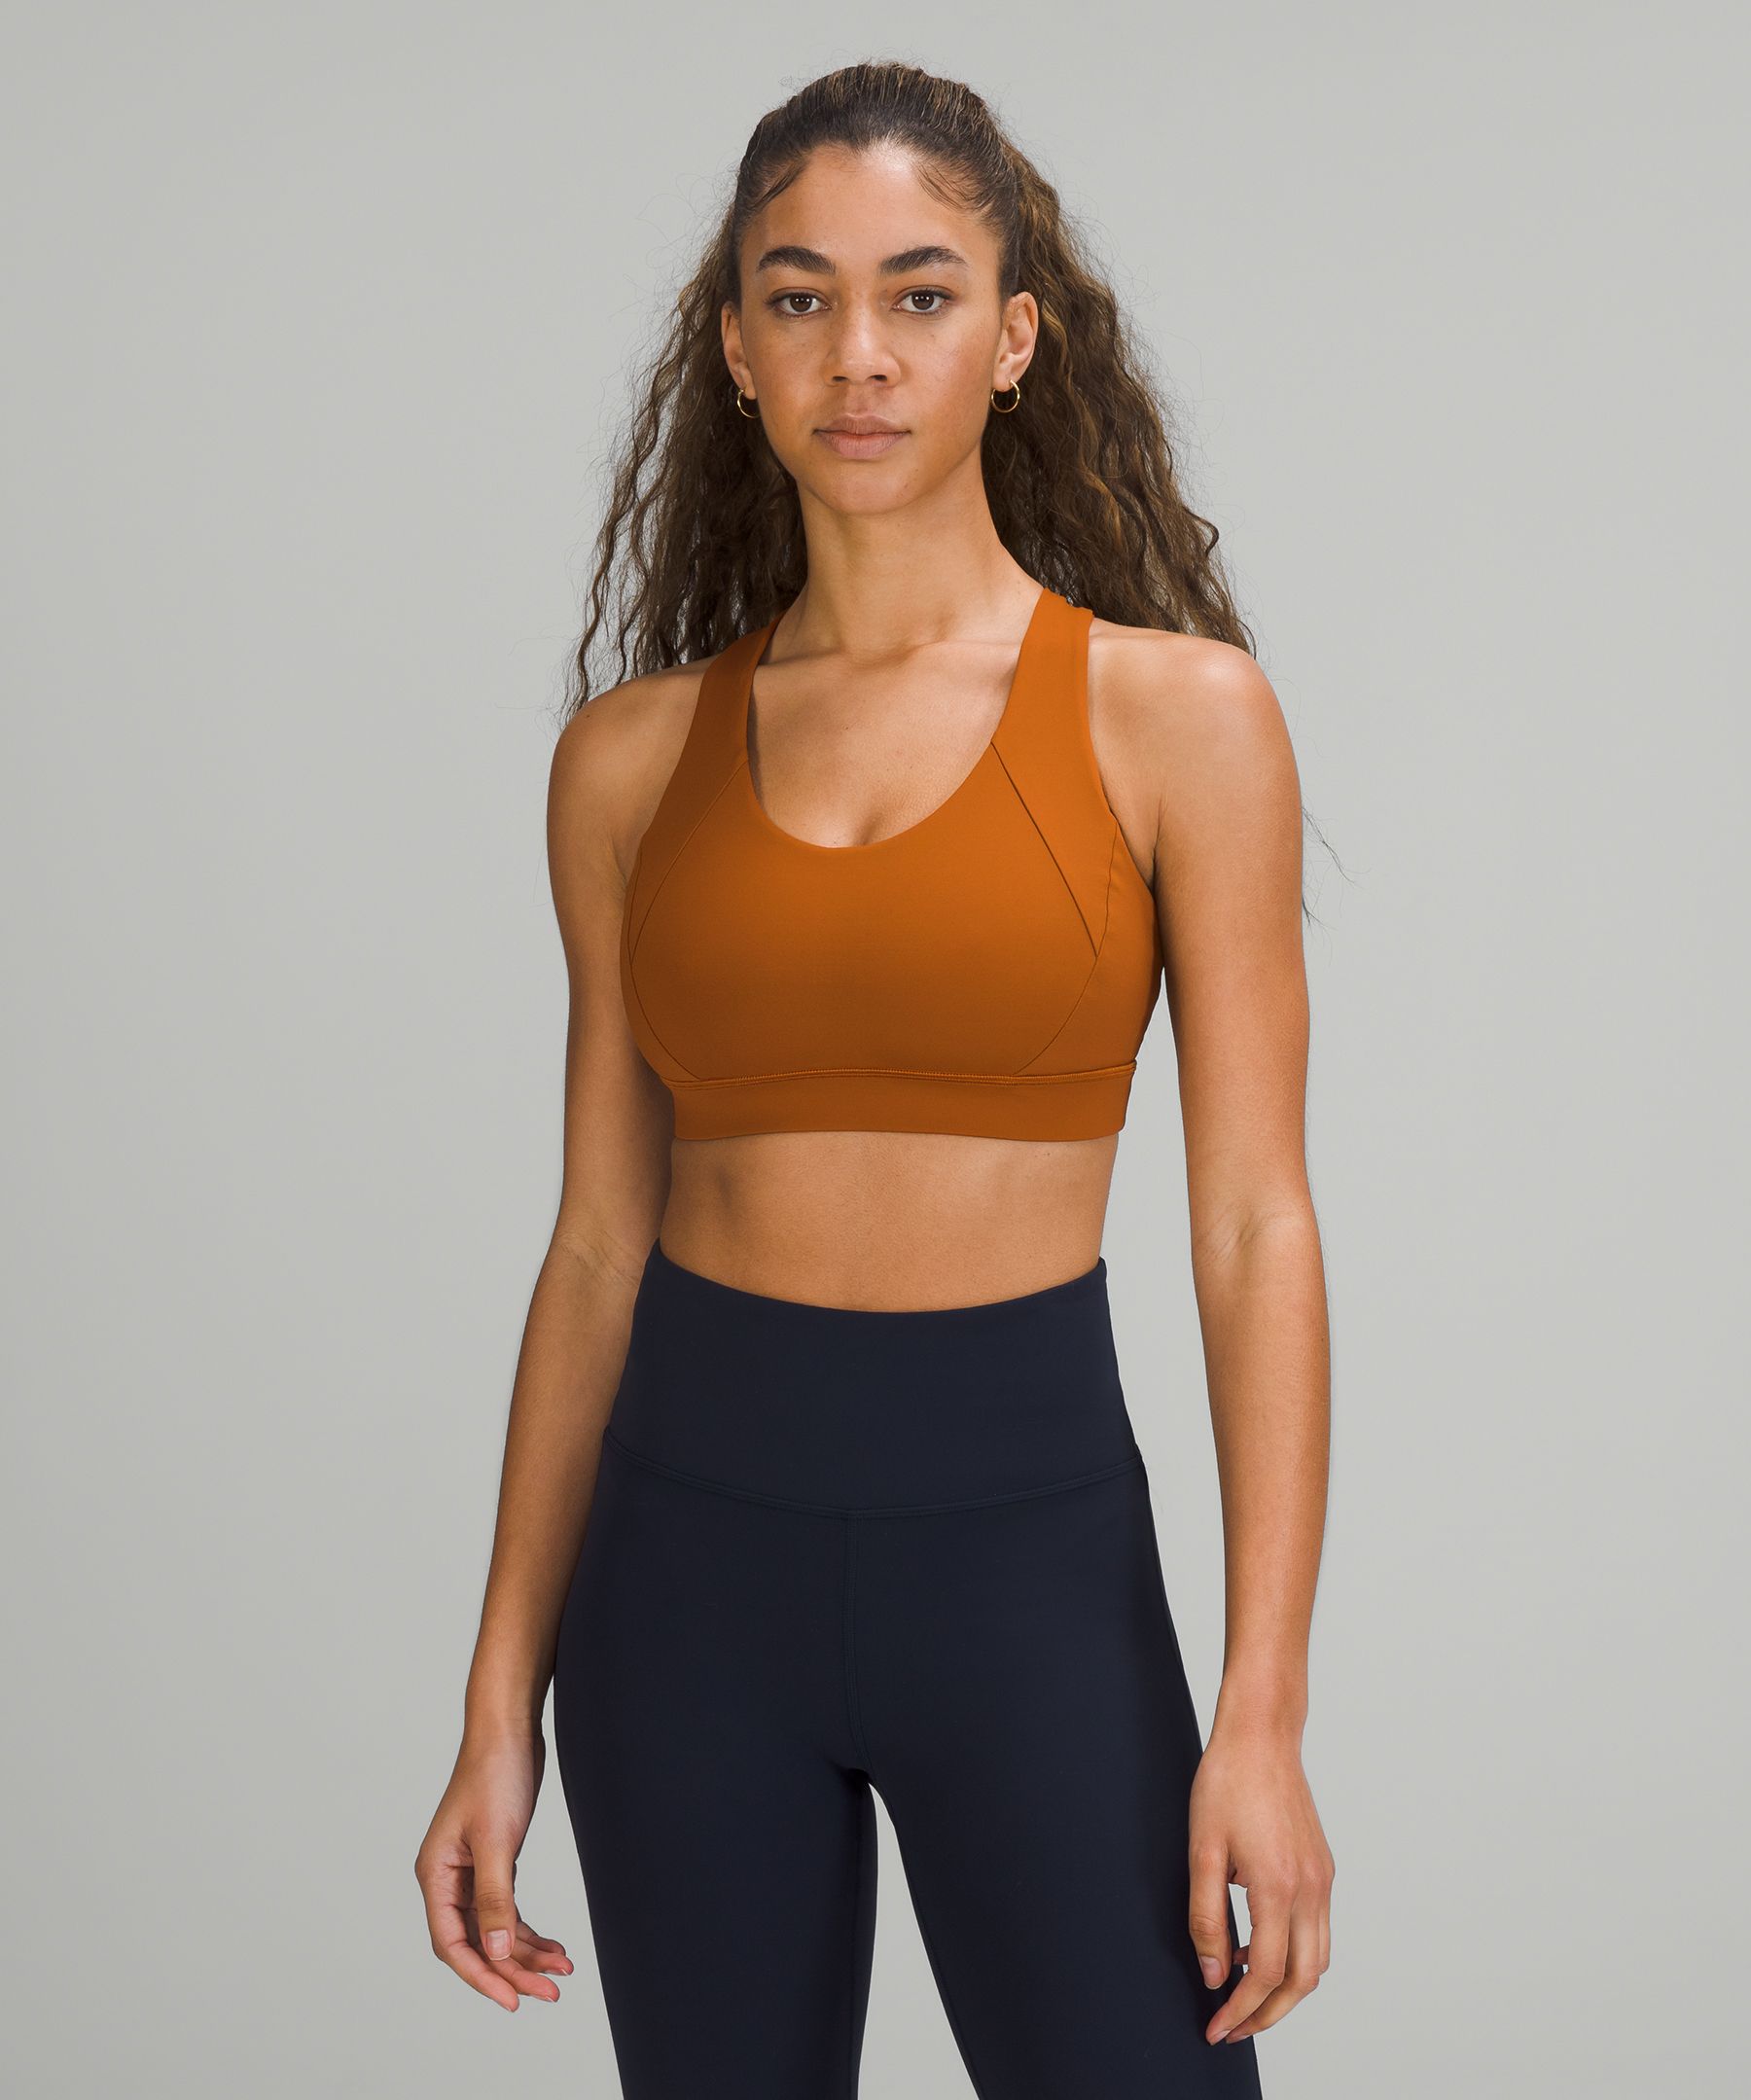 Lululemon Free To Be Elevated Bra Light Support, Dd/Ddd(E) Cup - ShopStyle